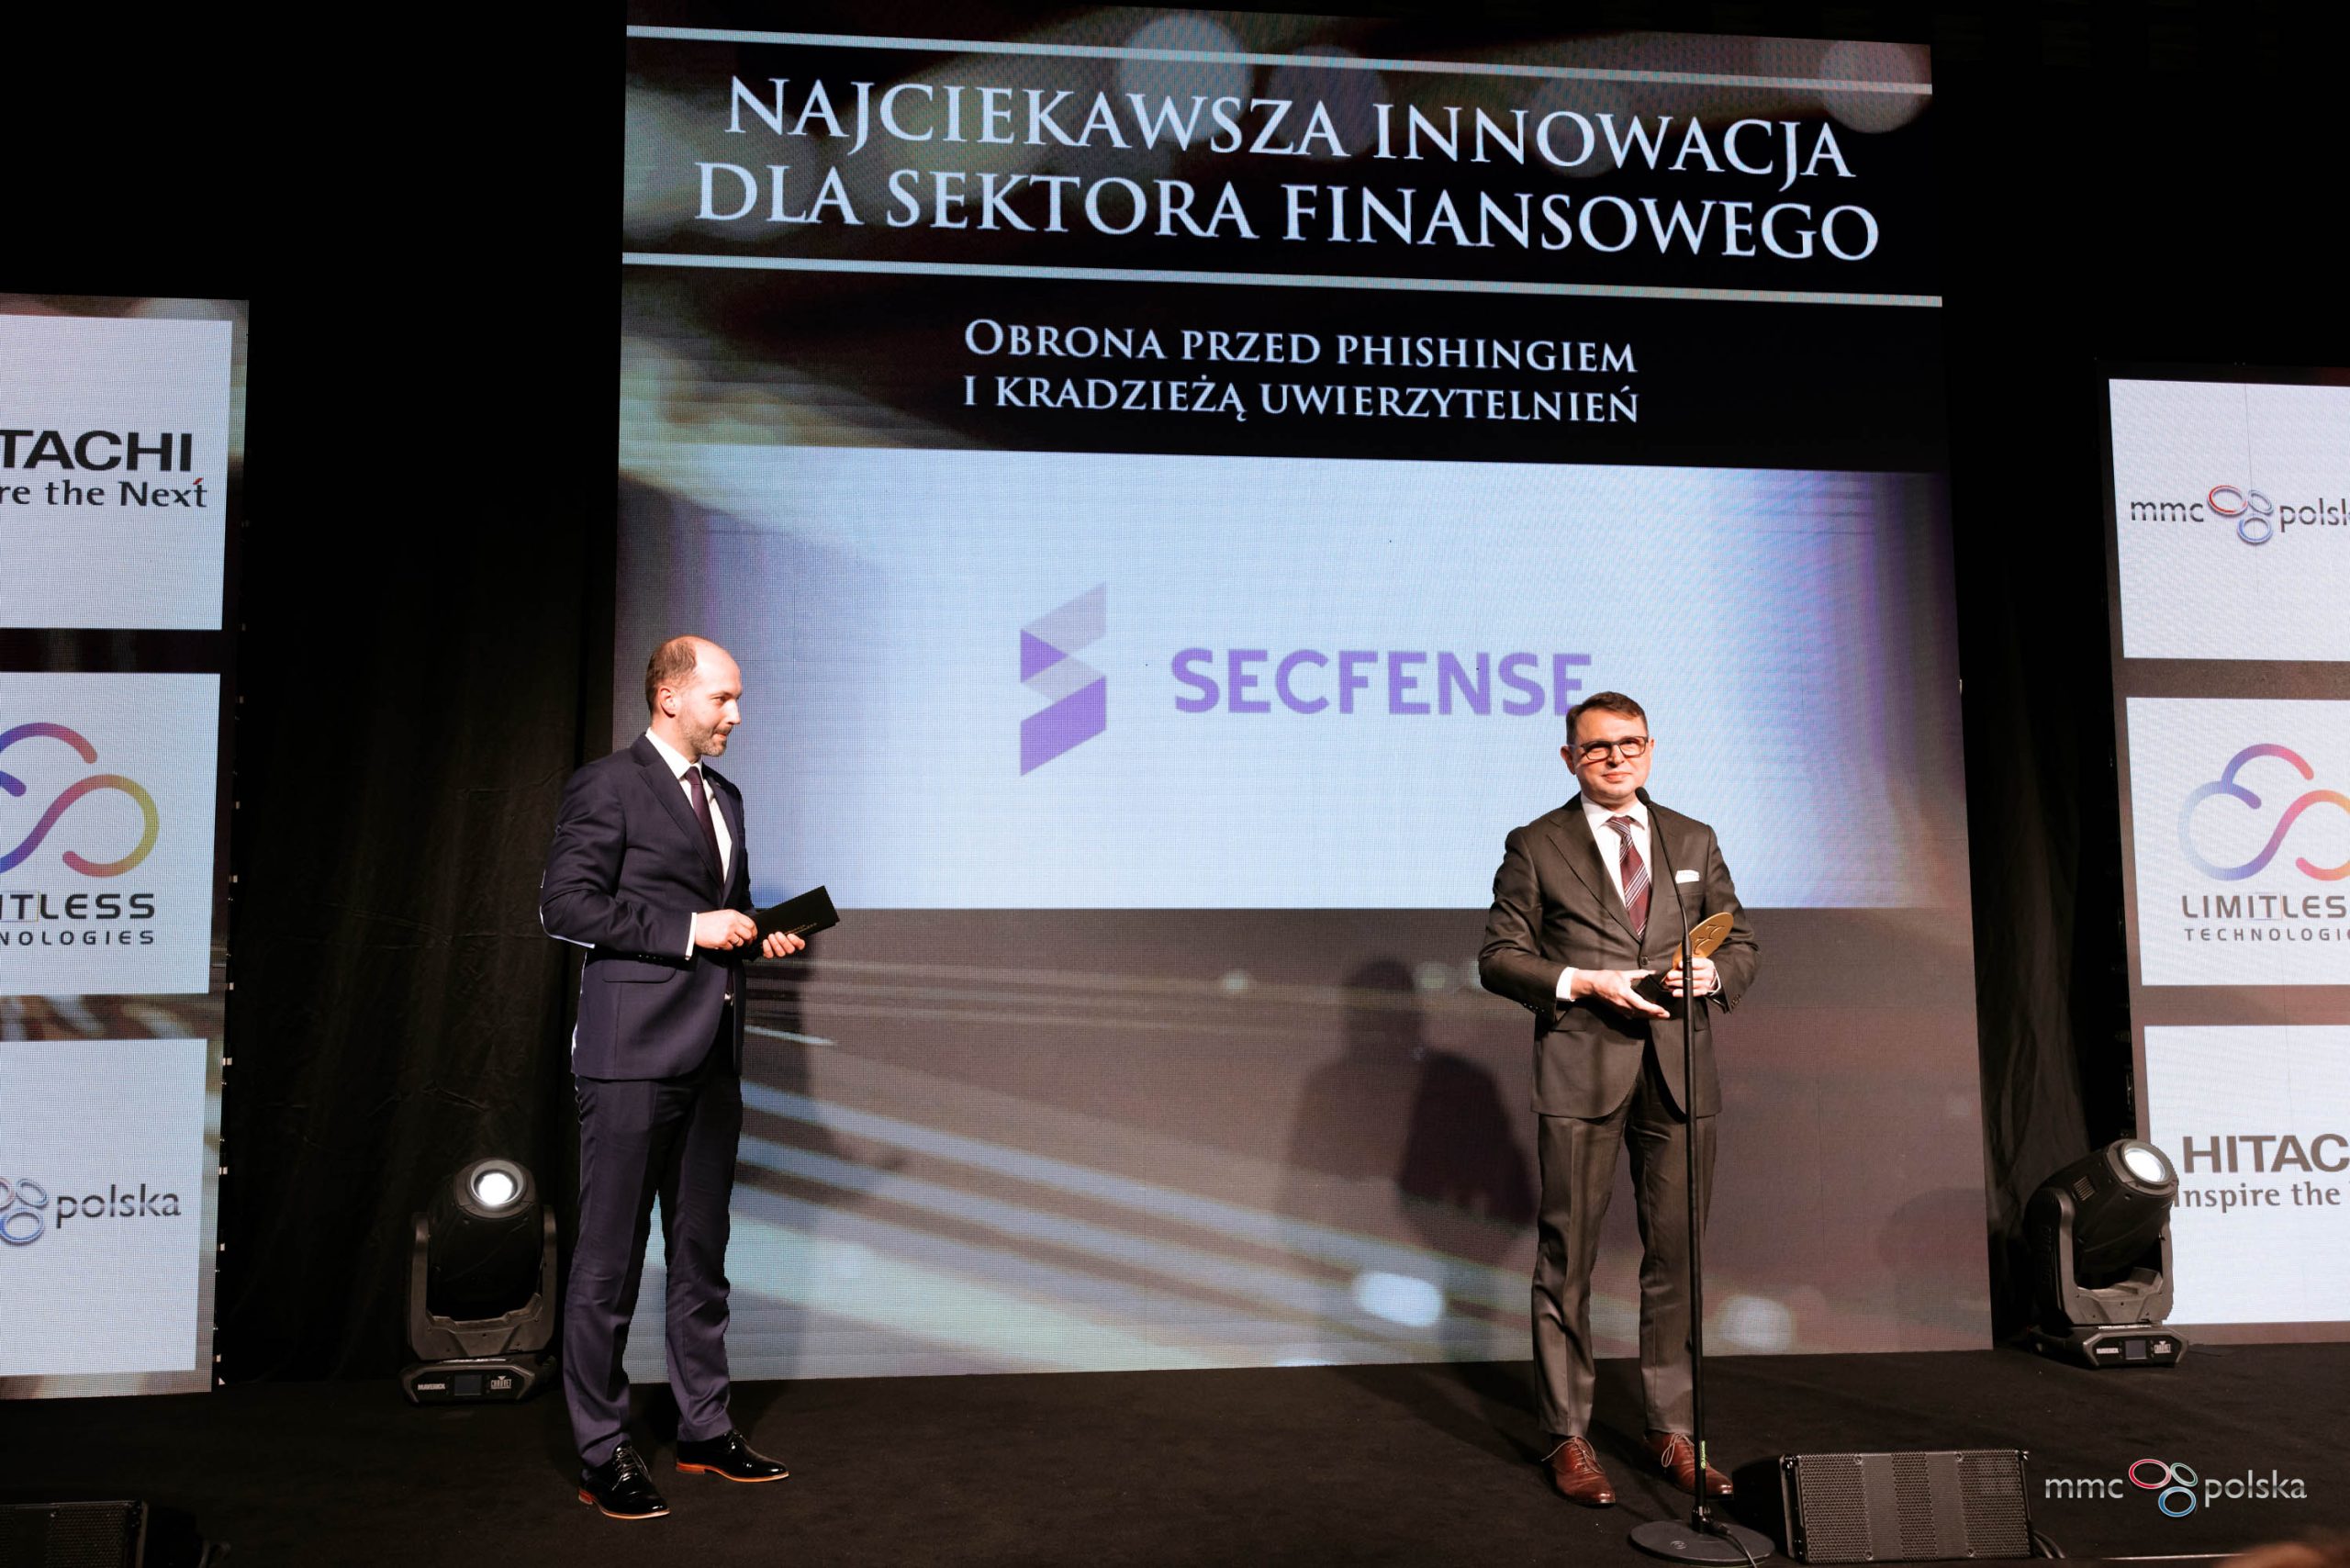 Secfense – The most interesting innovation for the financial sector